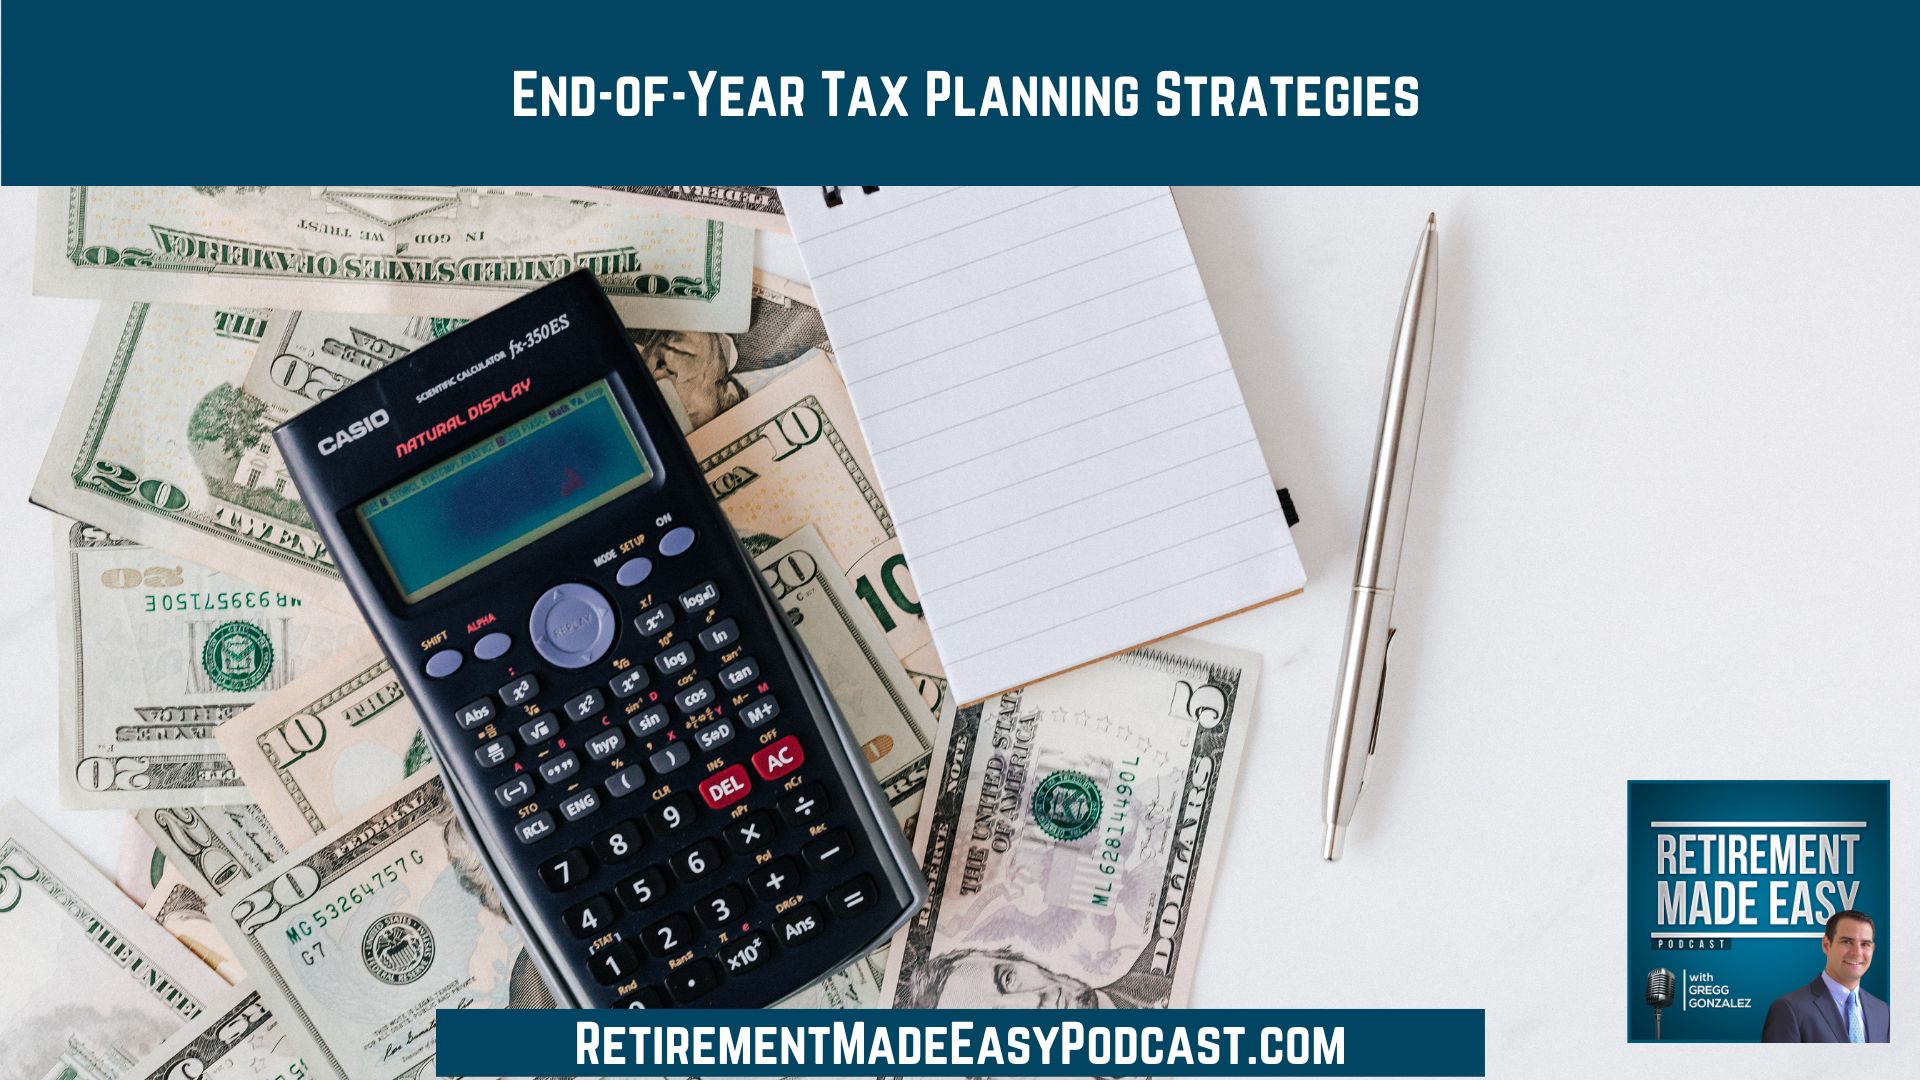 End-of-Year Tax Planning Strategies